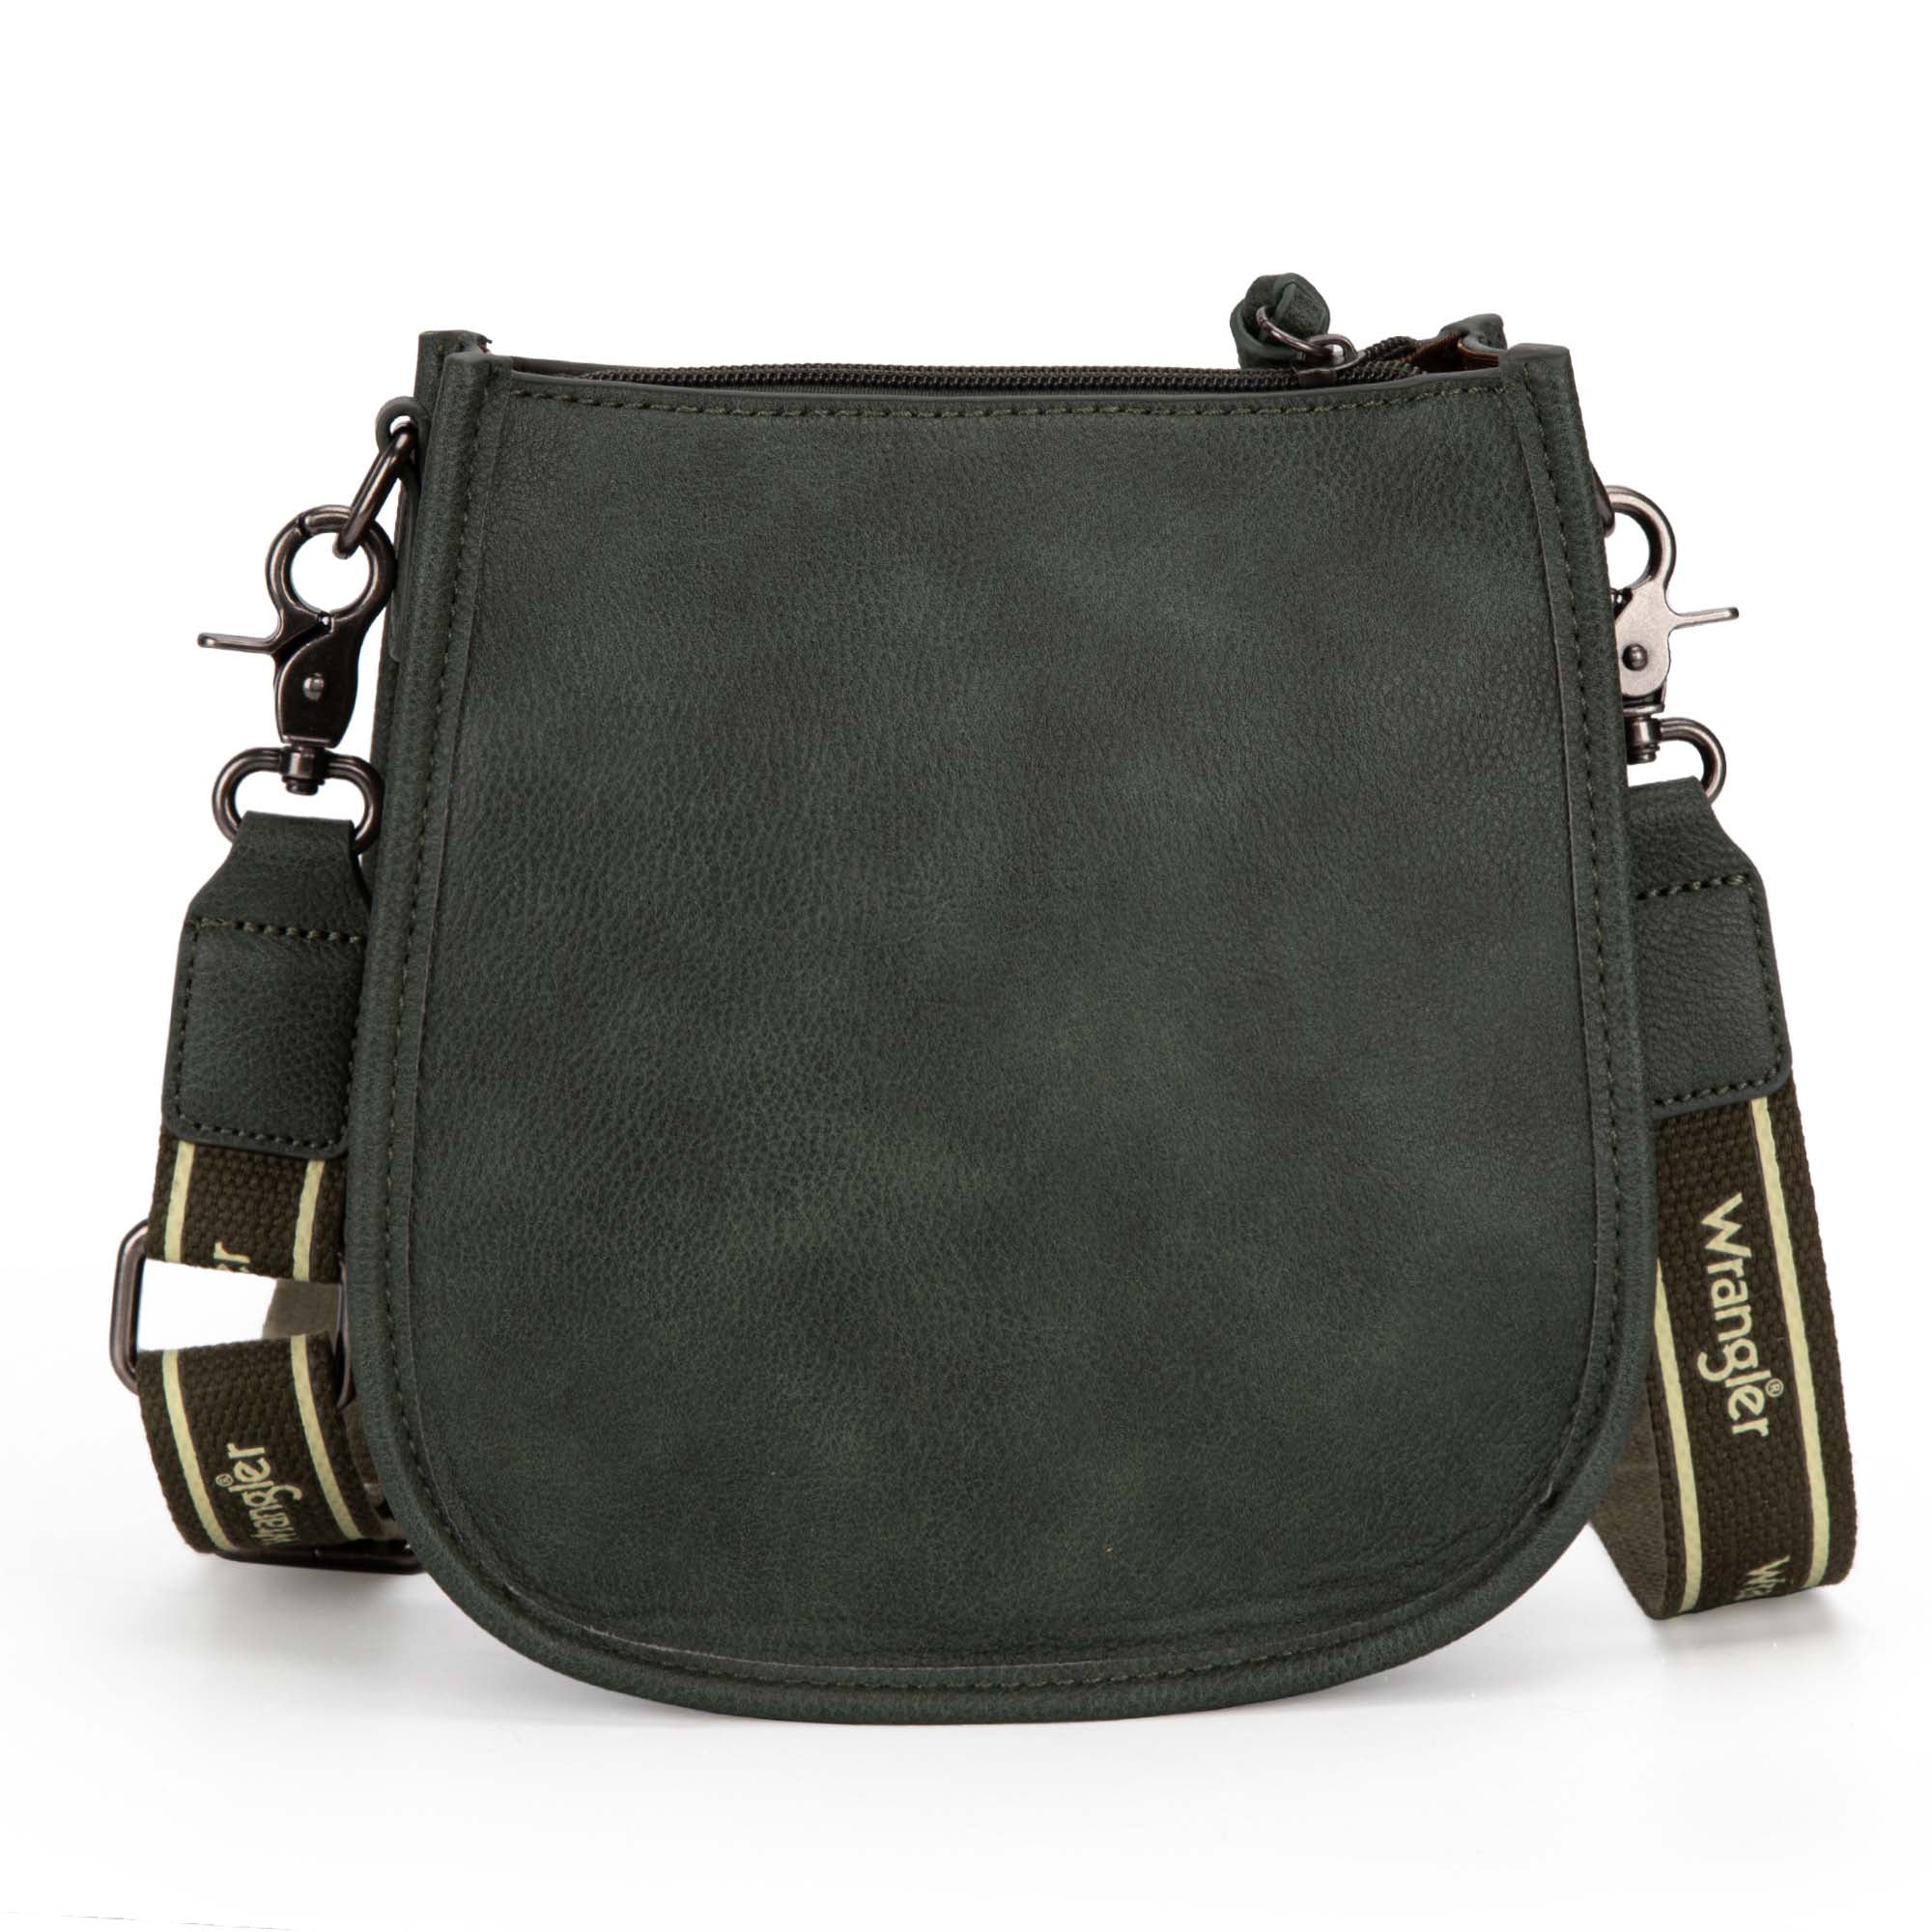 The Half Moon Crossbody is one of our - Thirty-One Gifts